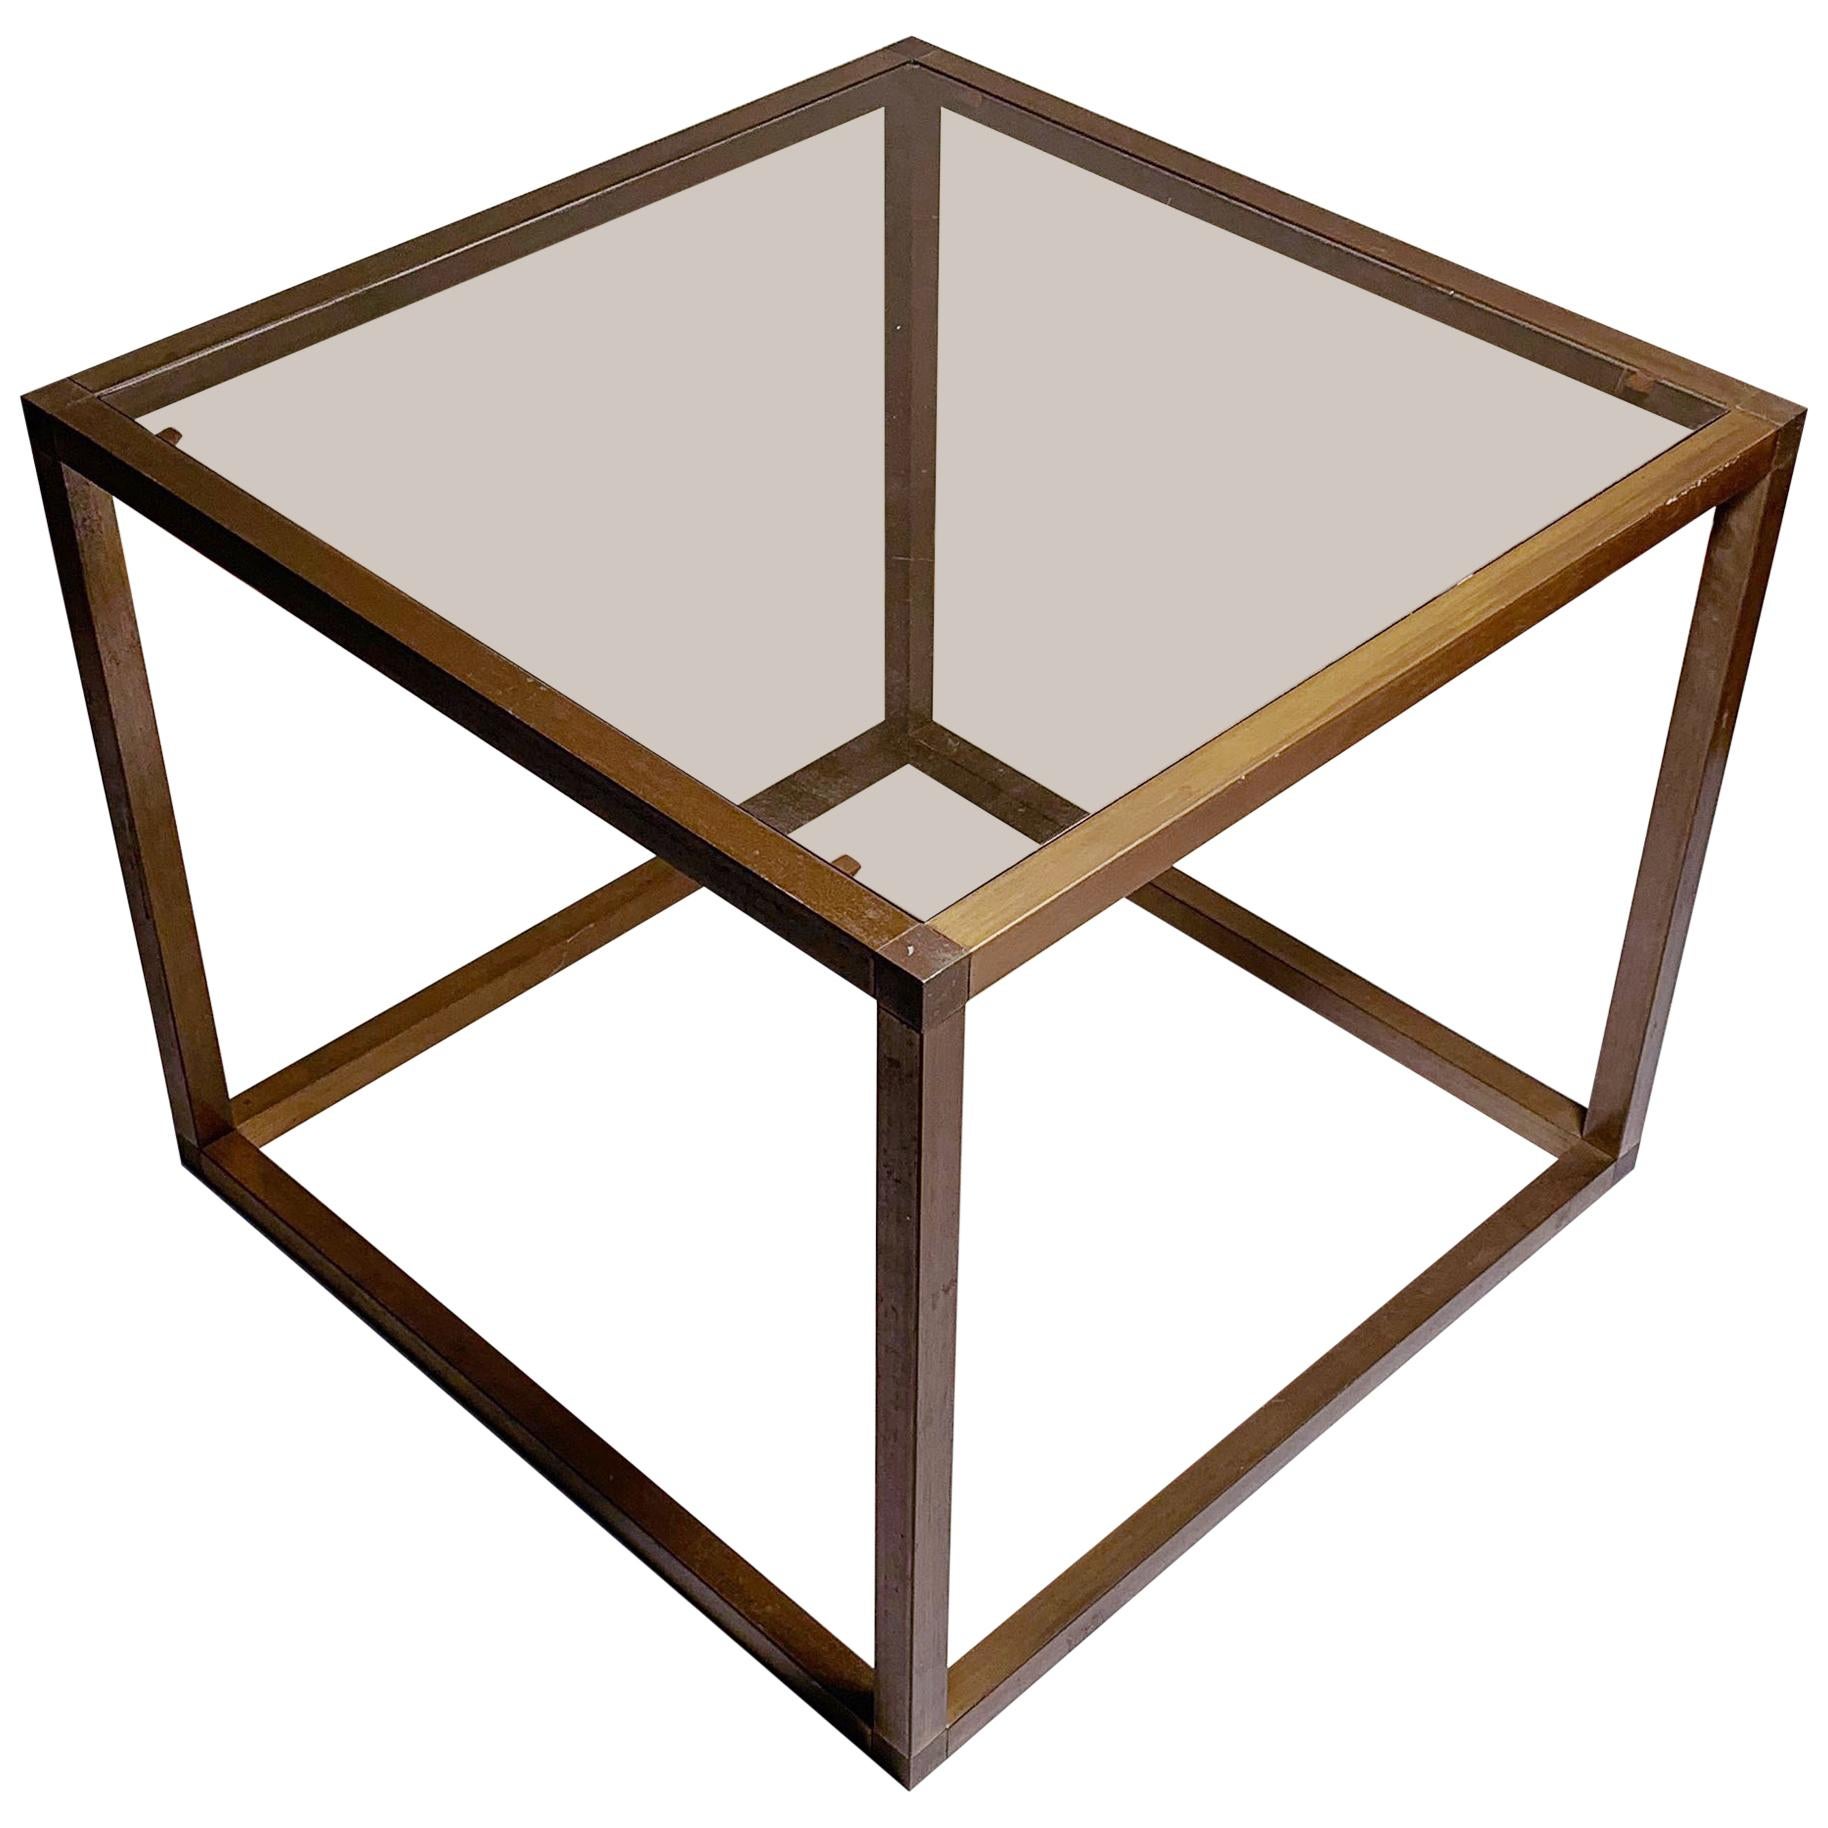 Italian 1960s-1970s Bronzed Extrusion Cube table